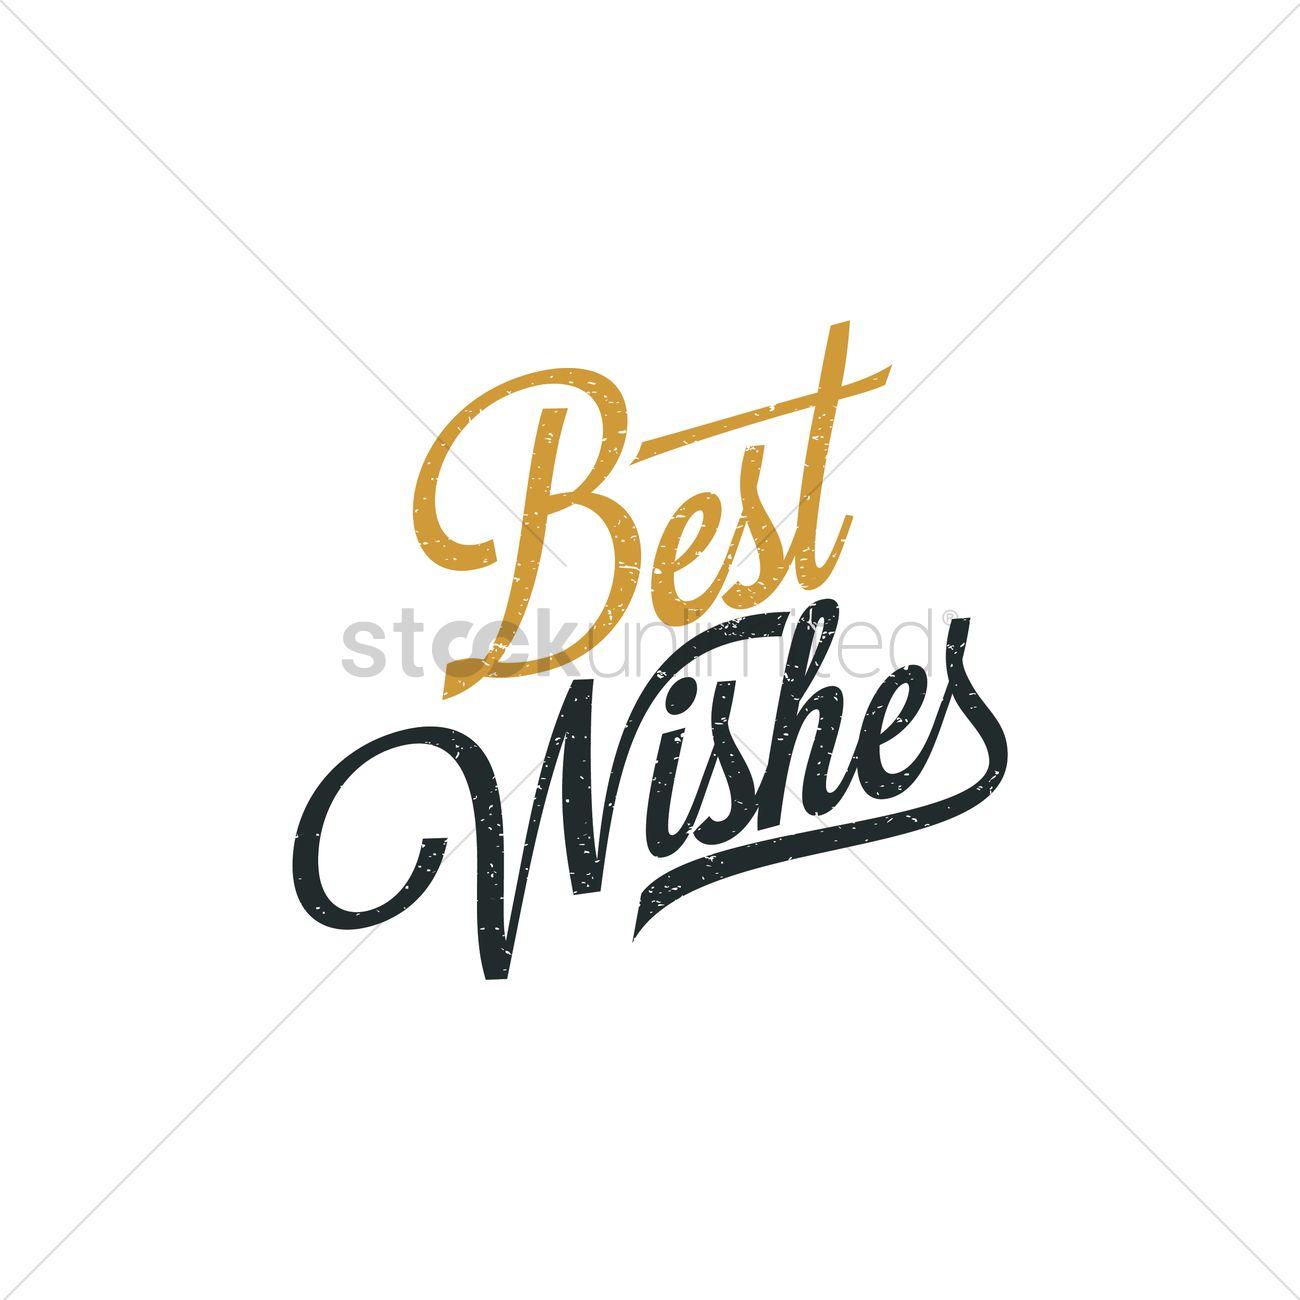 Best Wishes Logo - Best wishes hand lettering Vector Image - 1827258 | StockUnlimited